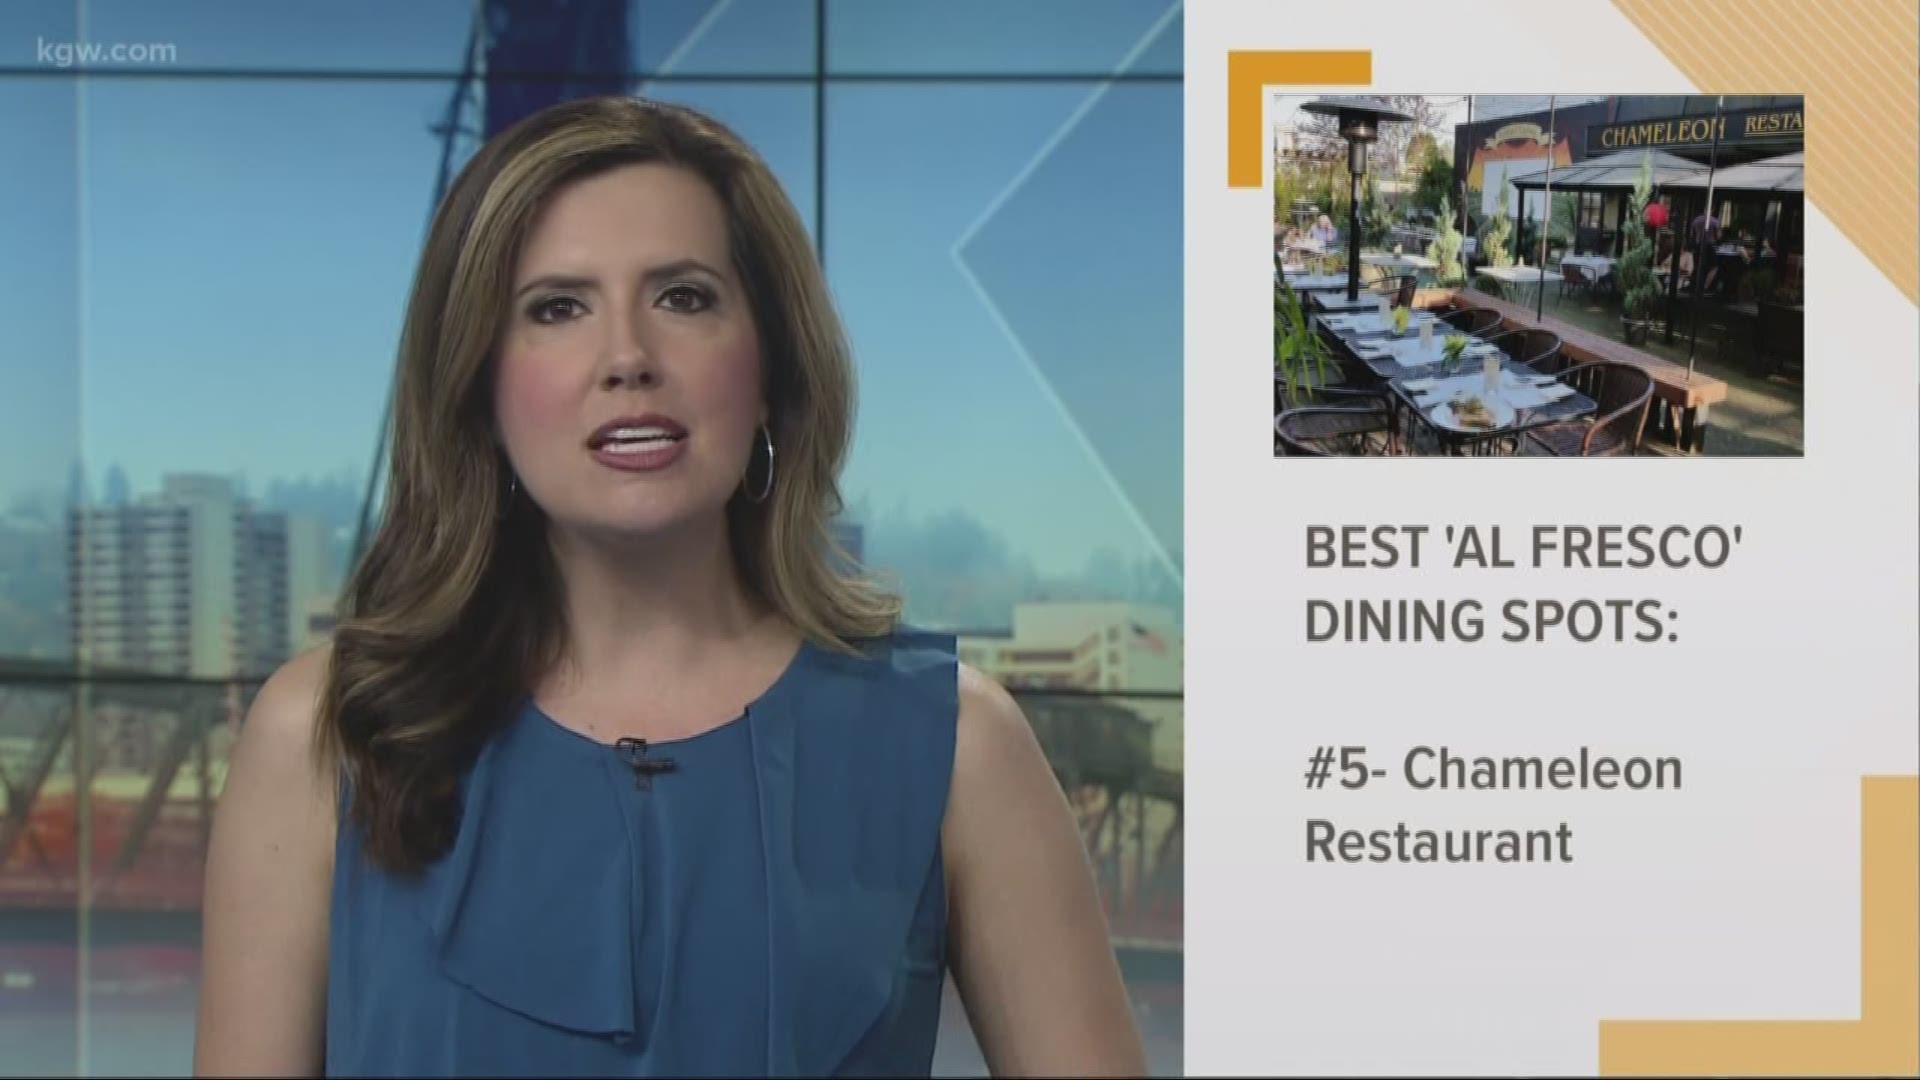 Sunrise anchor Nina Mehlhaf is KGW's in-house foodie. She lists her five favorite places to dine outside.